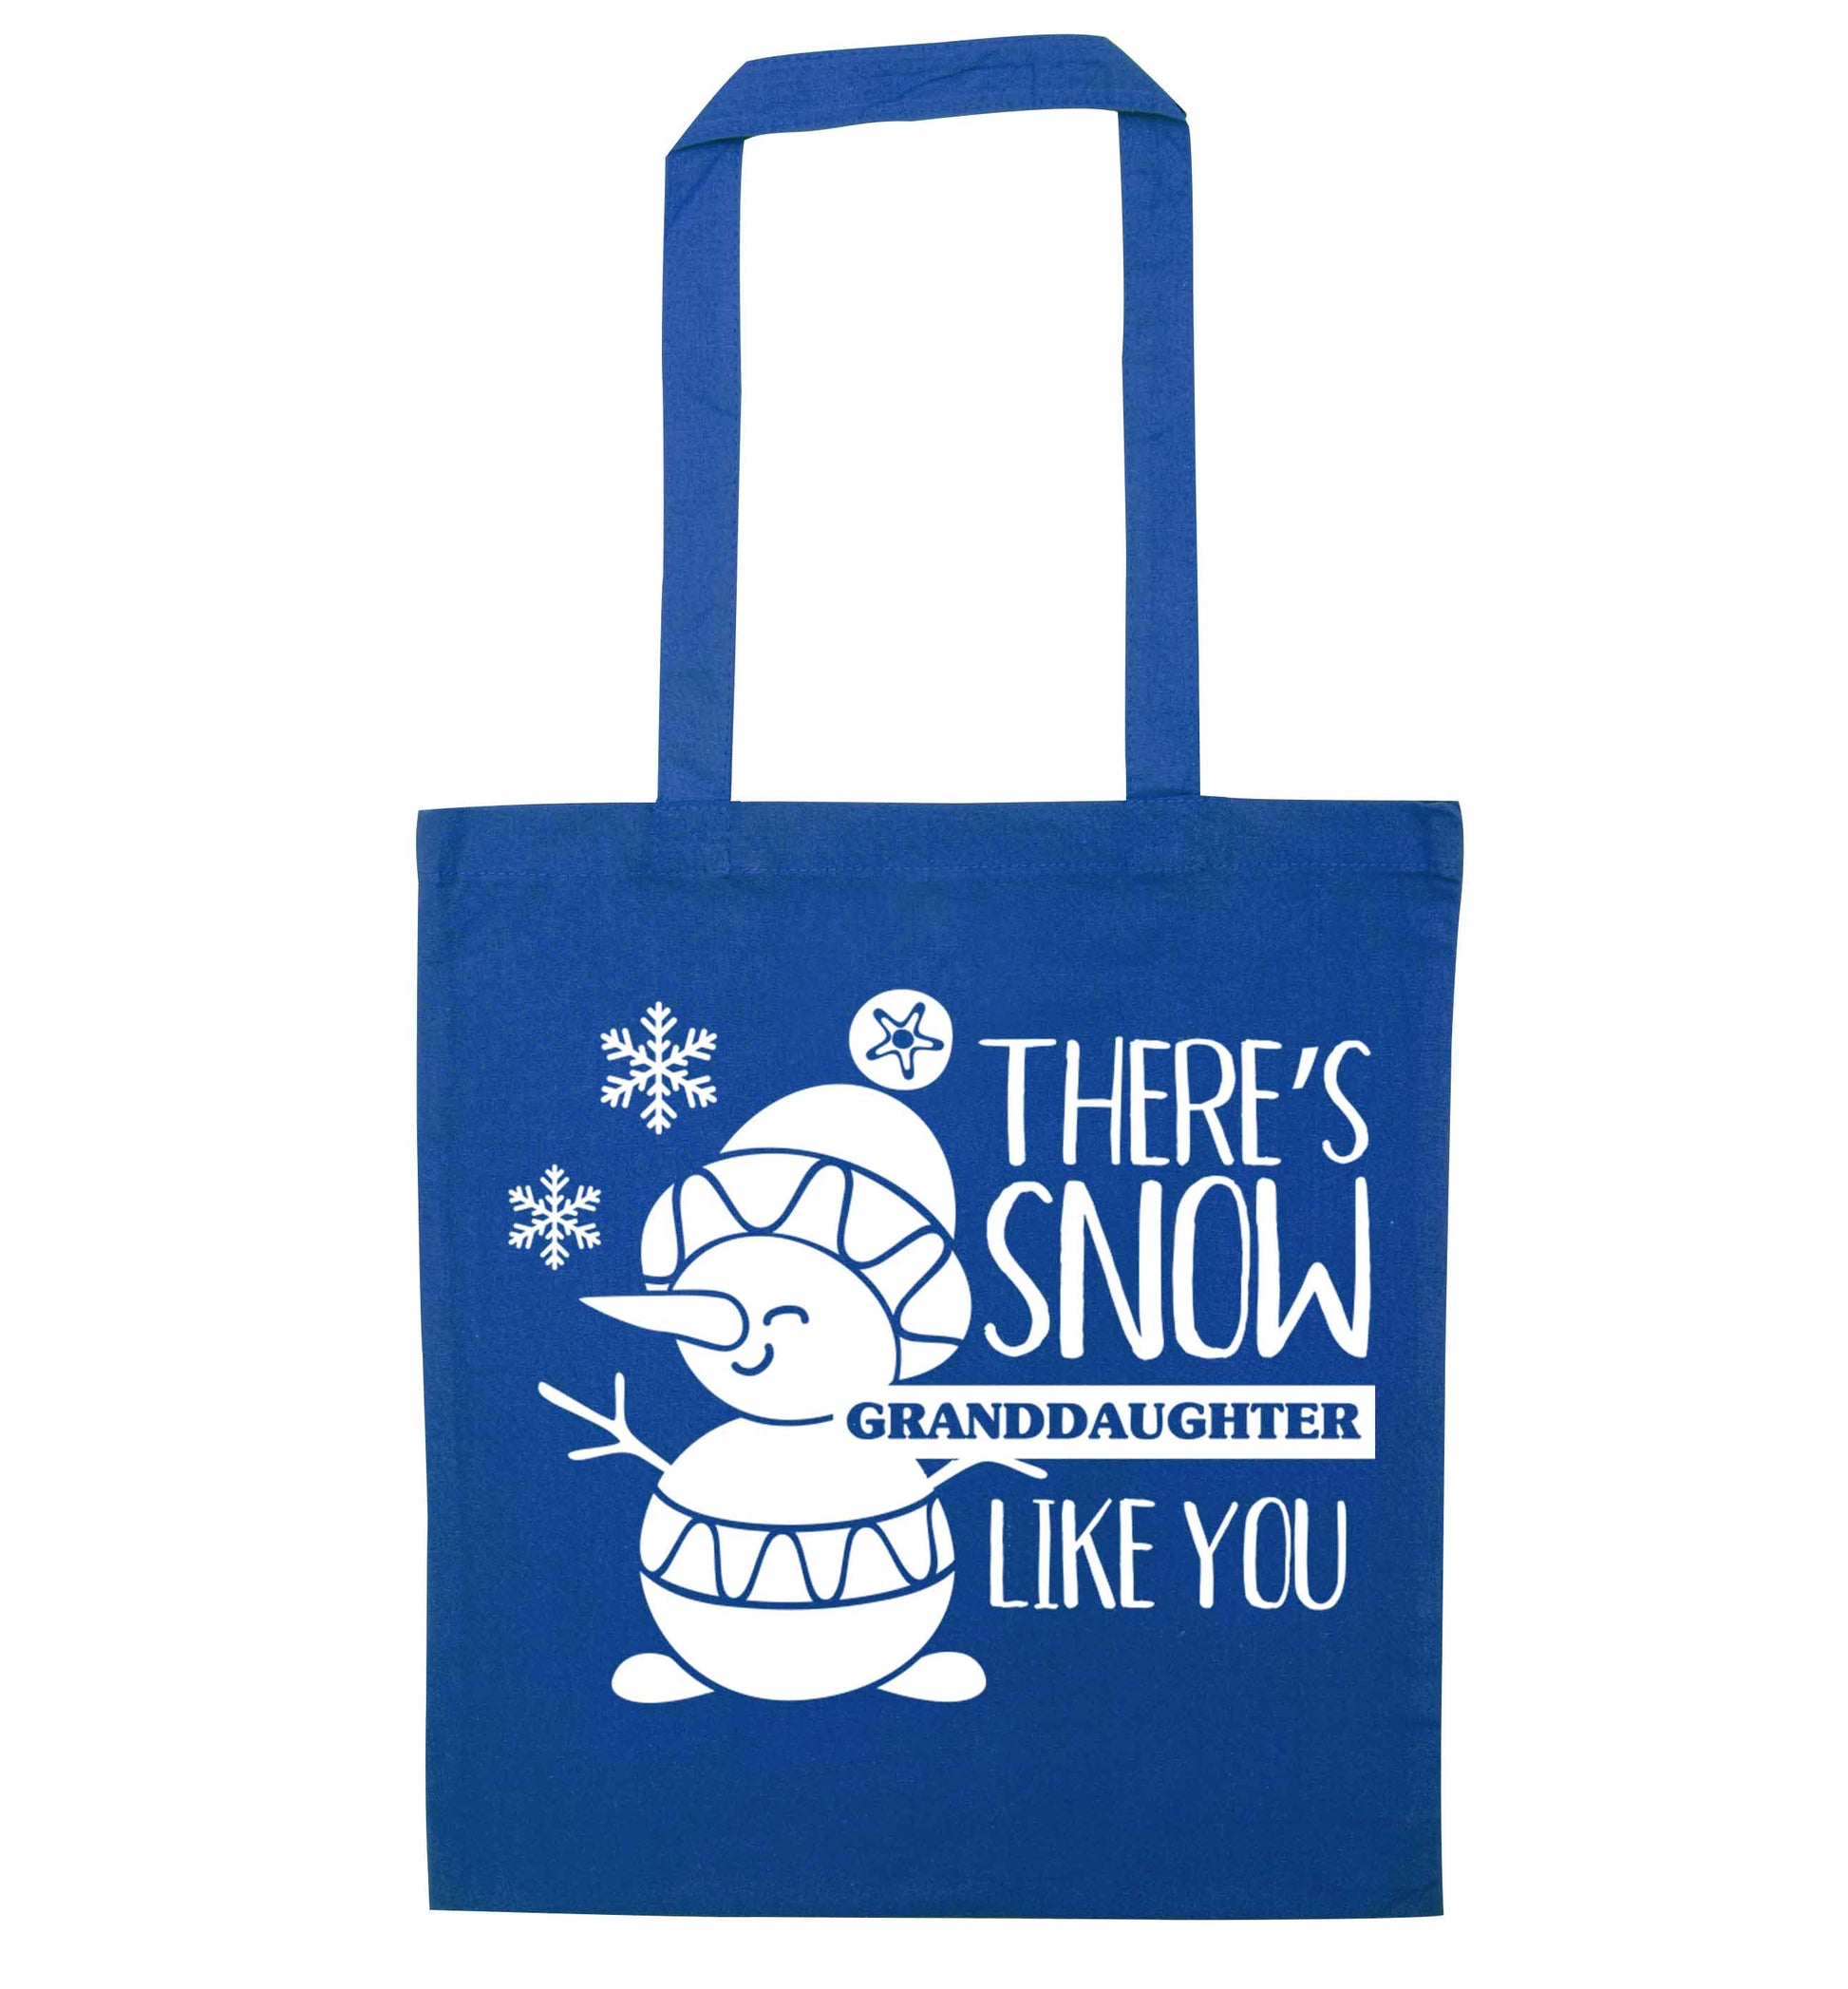 There's snow granddaughter like you blue tote bag